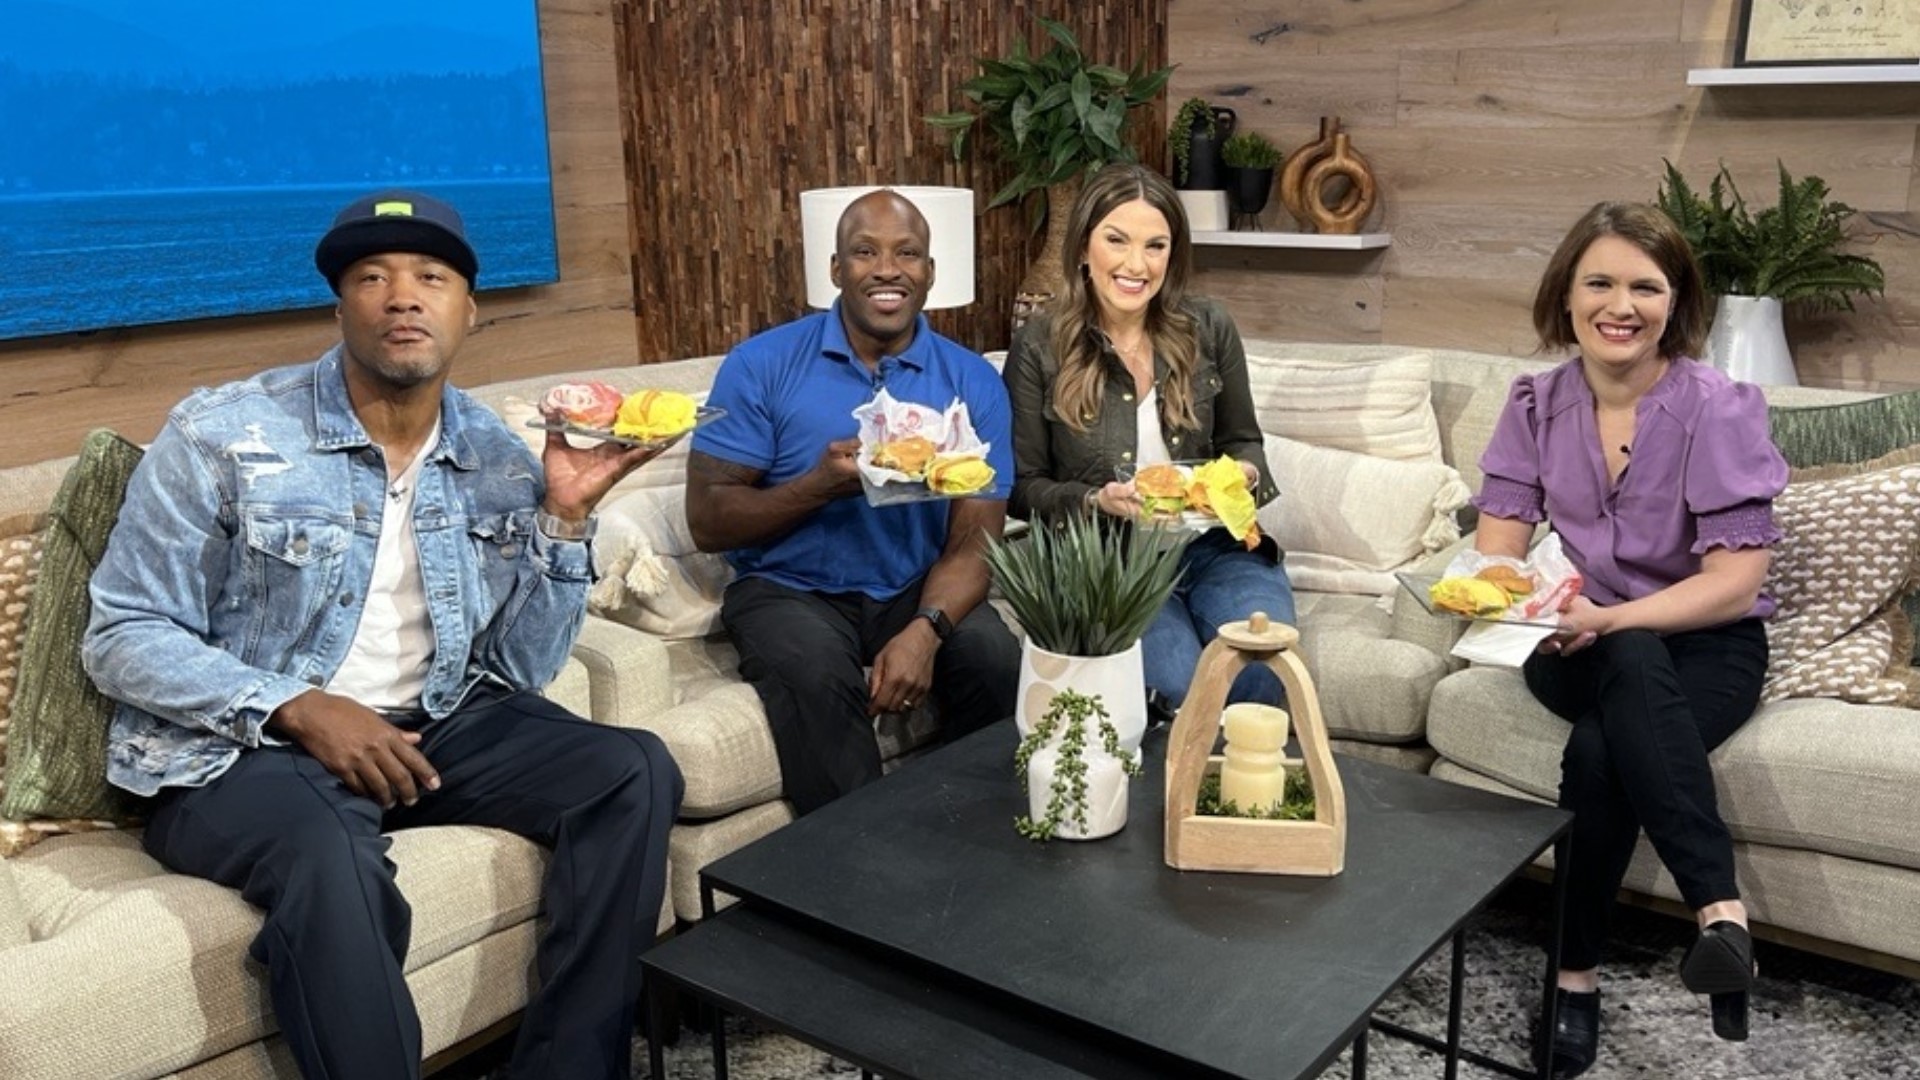 Terry Hollimon, former NFL player Lawyer Milloy and producer Rebecca Perry join Amity to celebrate national cheeseburger day and talk UFOs and The Roman Empire trend